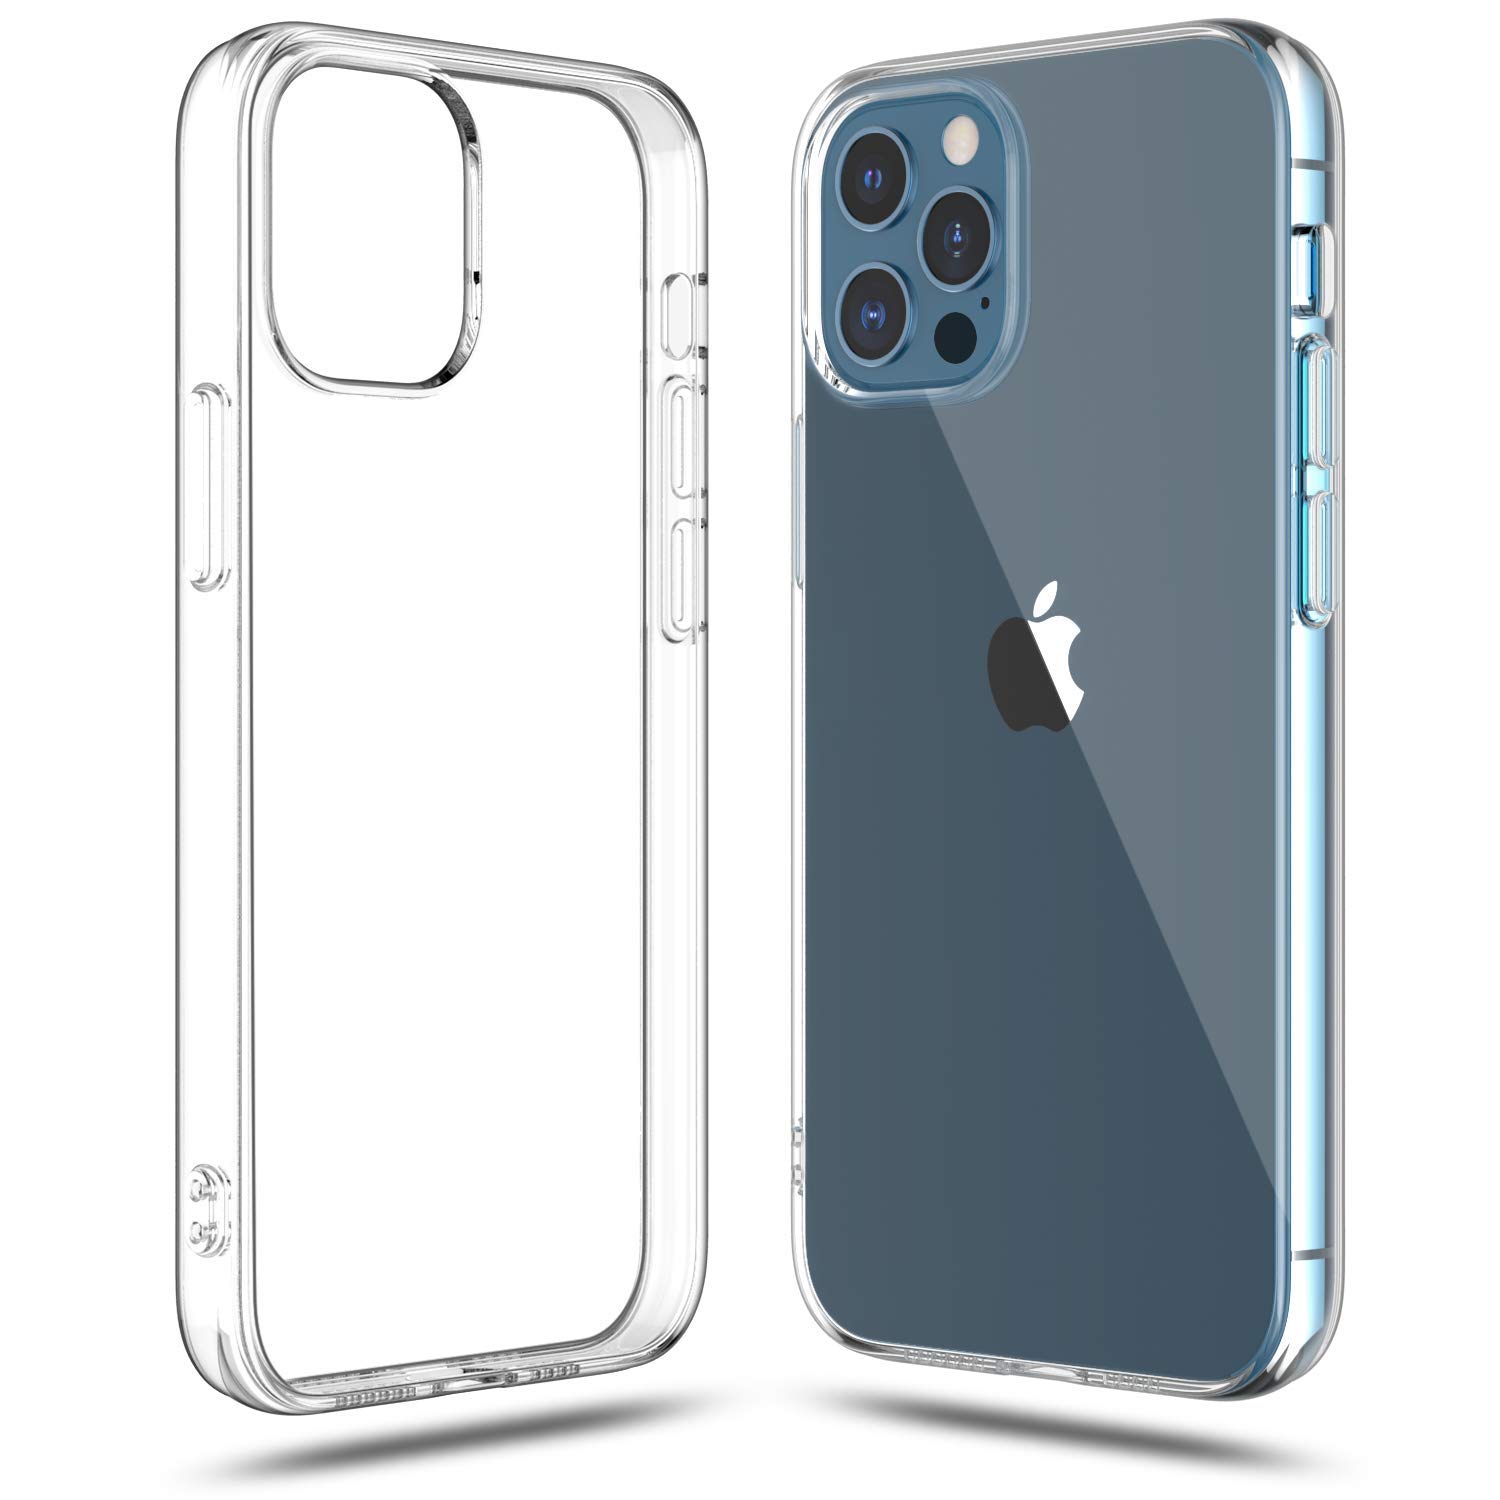 How Is The Iphone 12 Pro Clear Case Standing Apart?